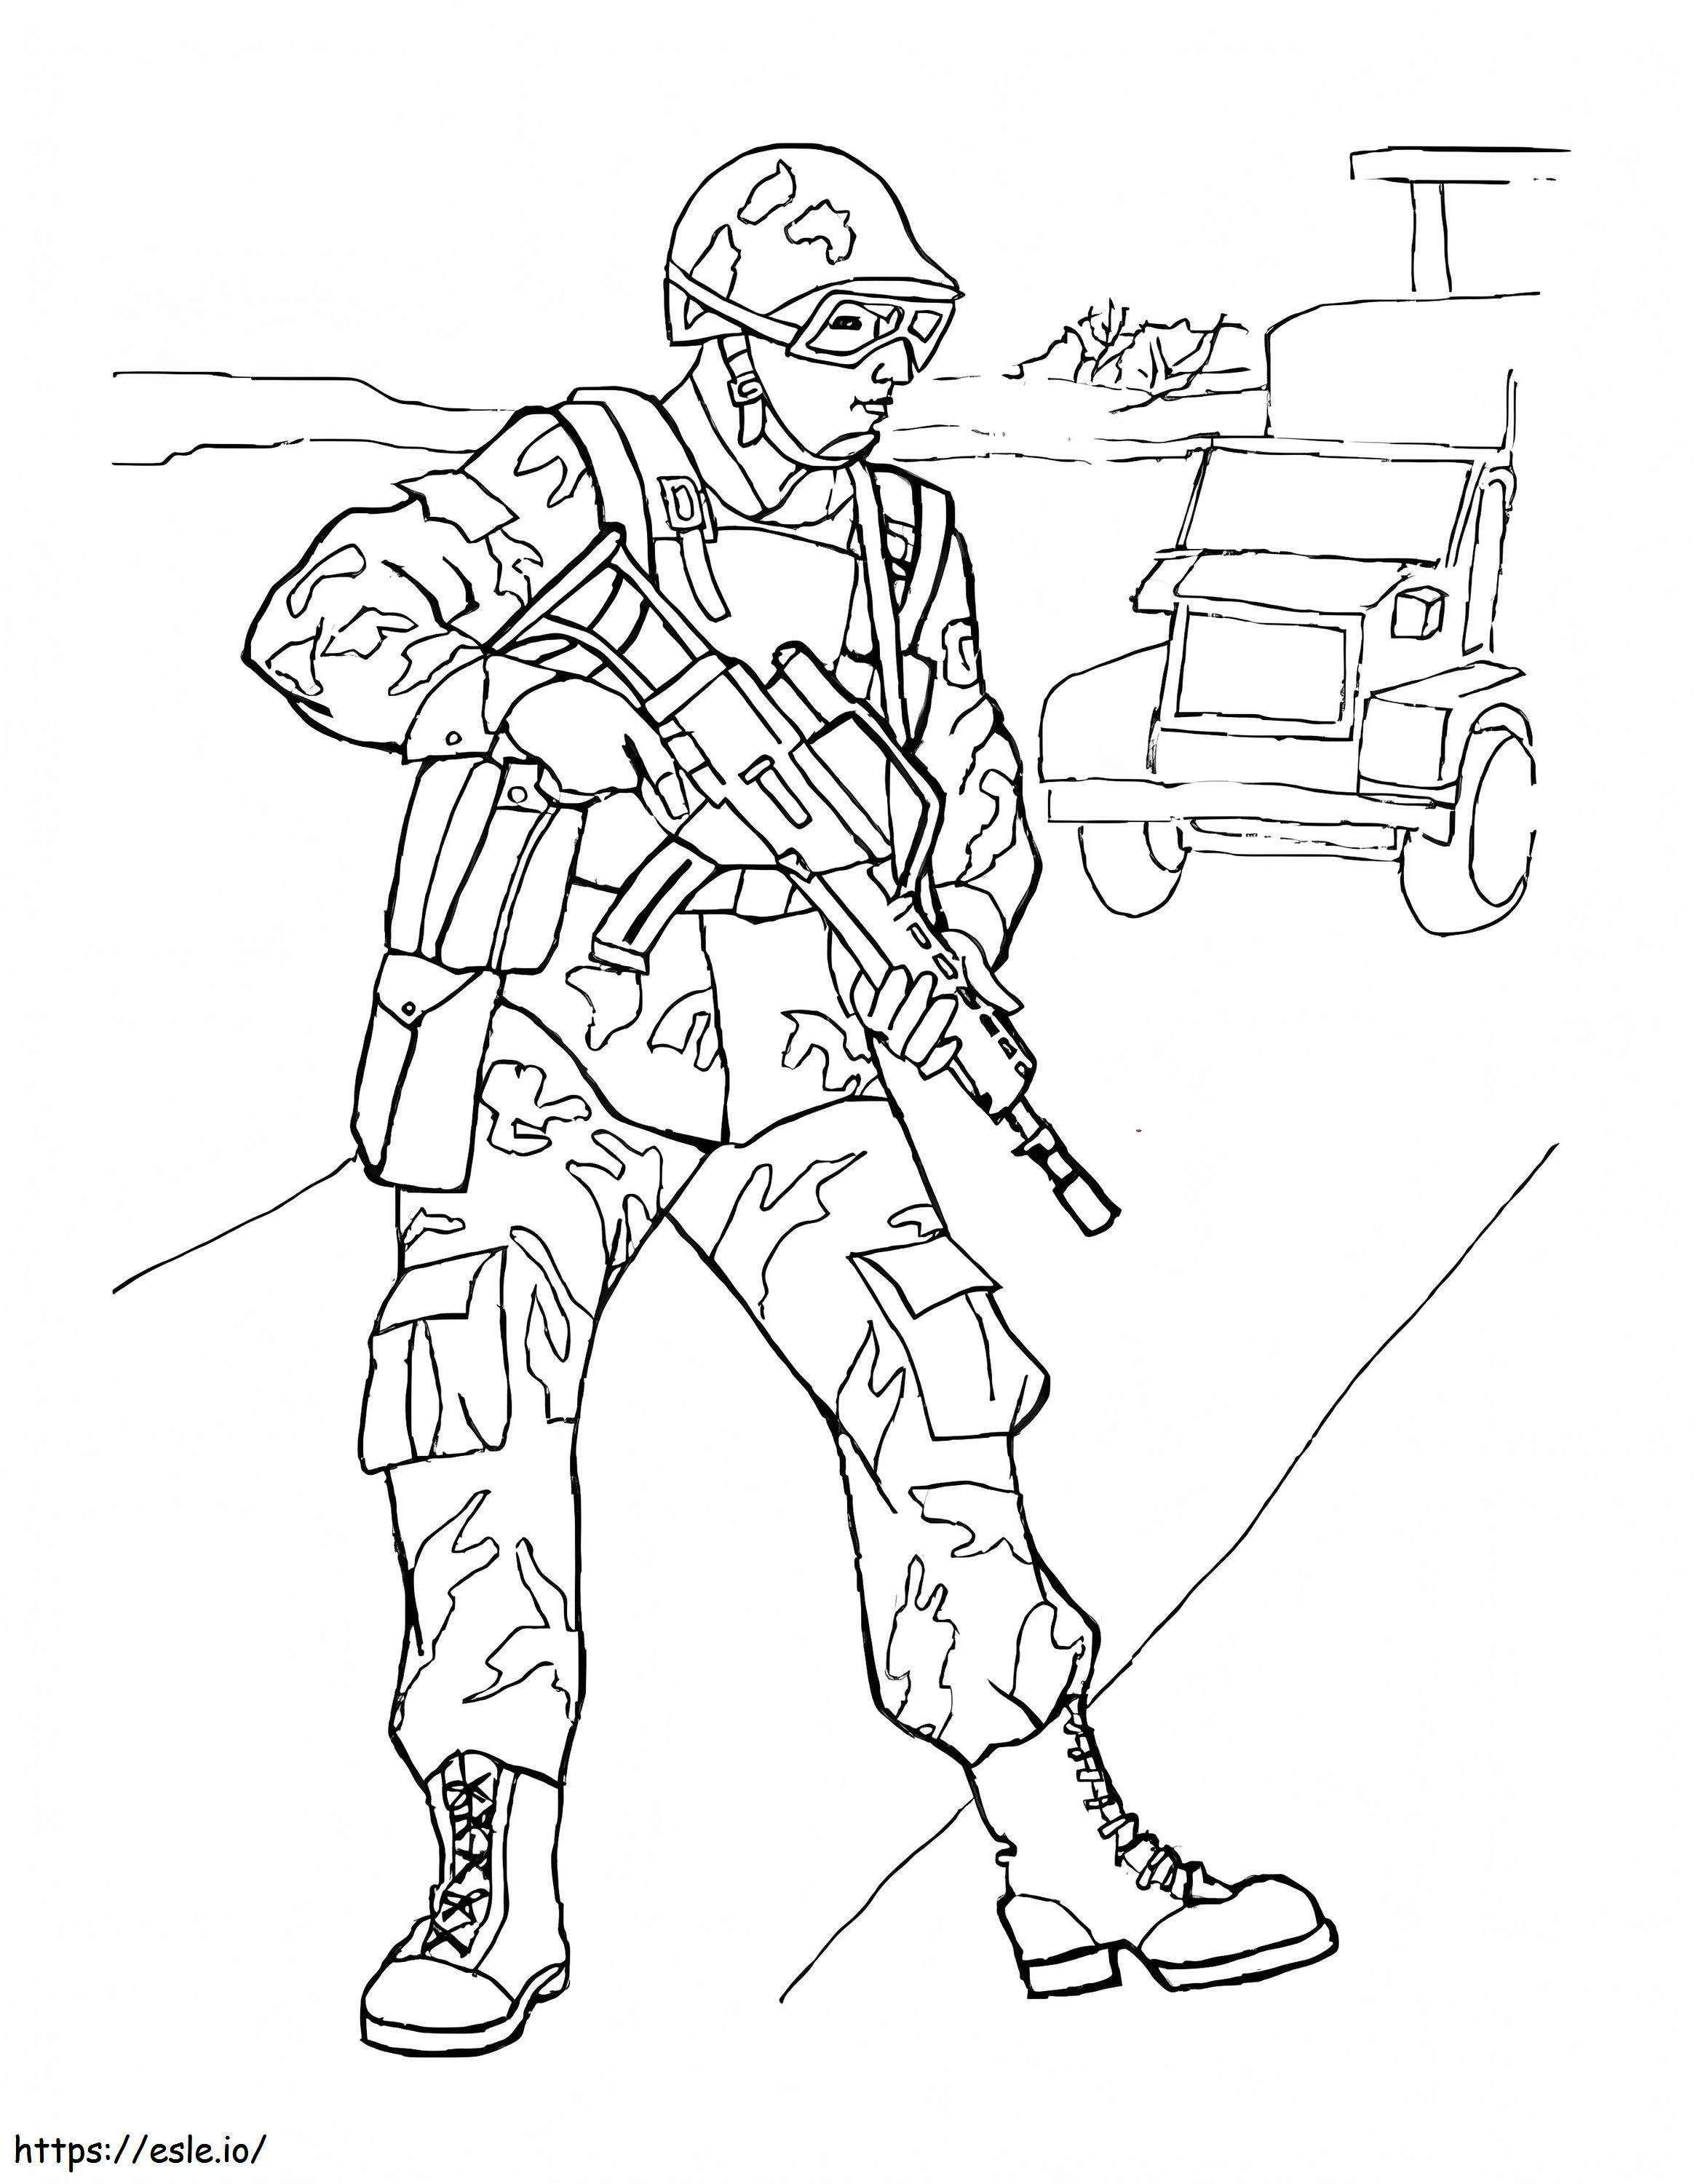 Military Soldier coloring page